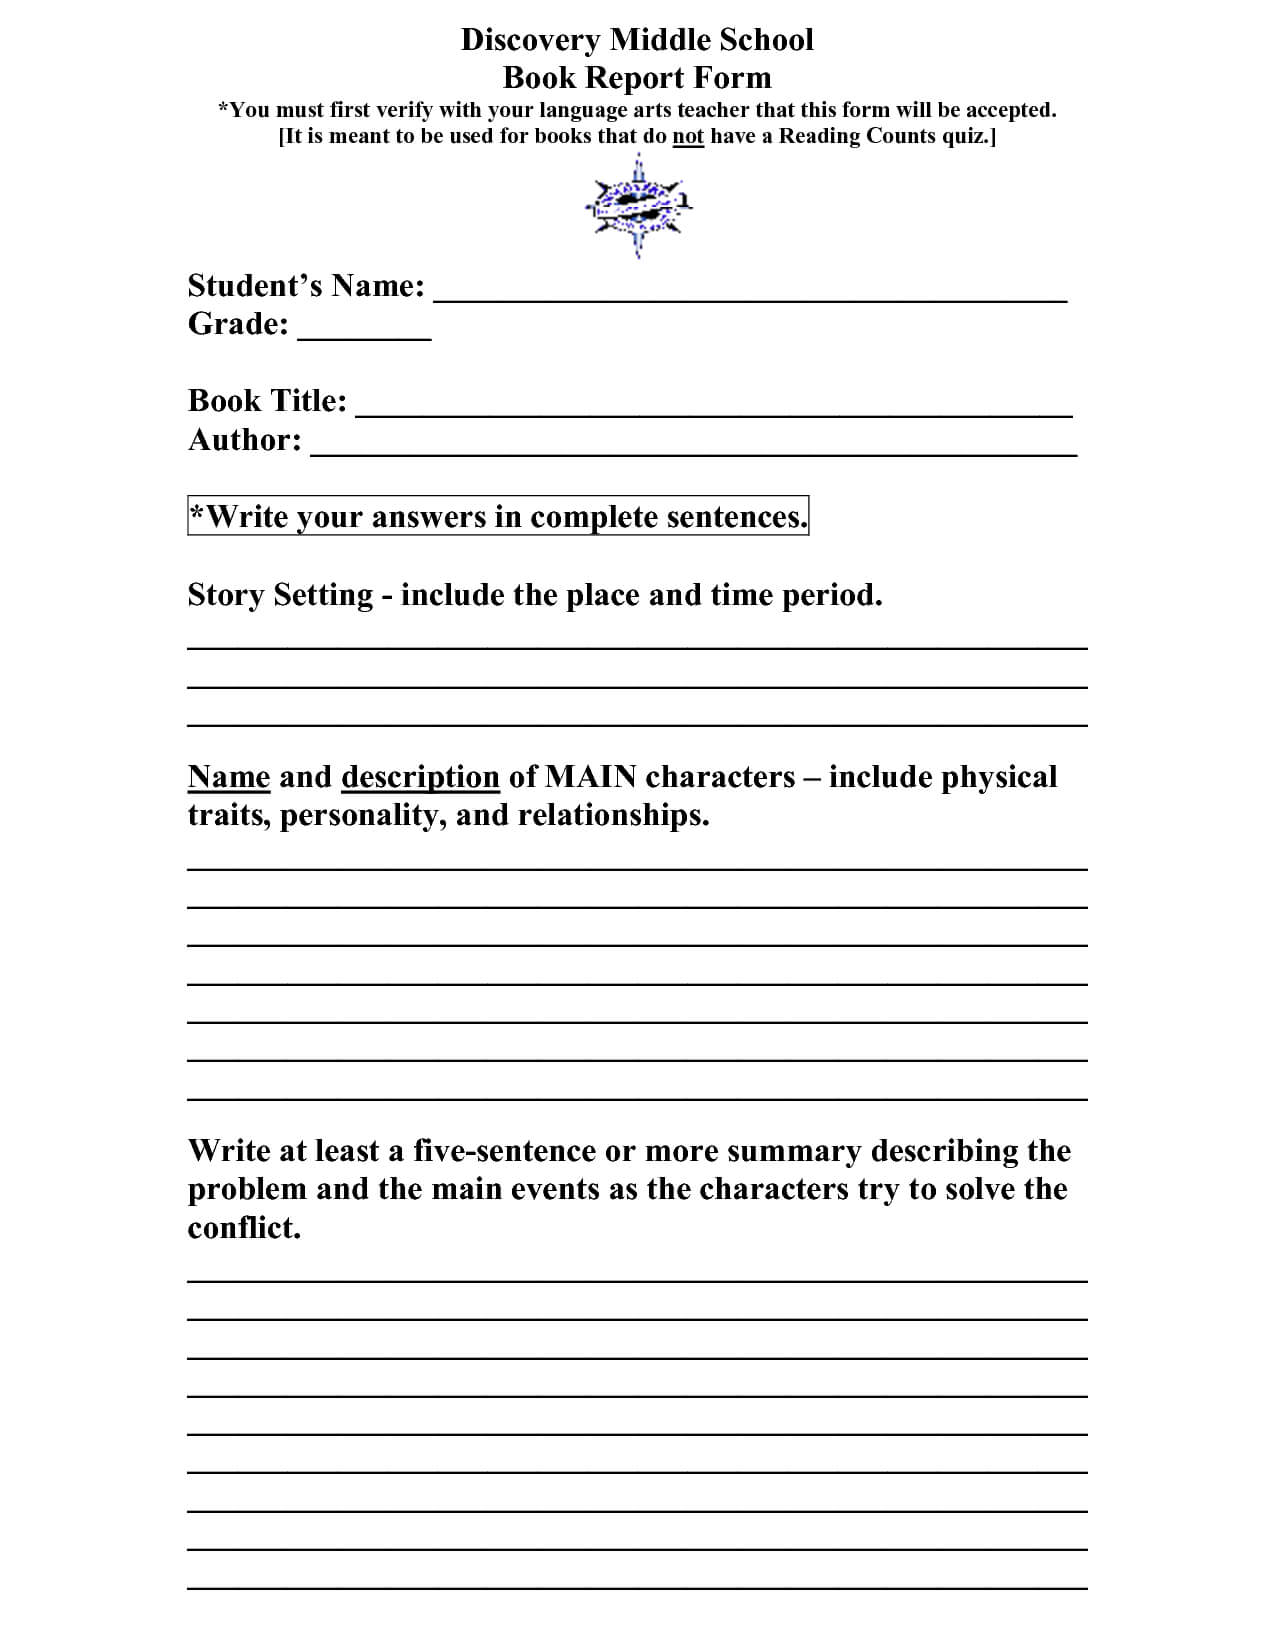 Scope Of Work Template | Teaching & Learning | Middle School In High School Book Report Template